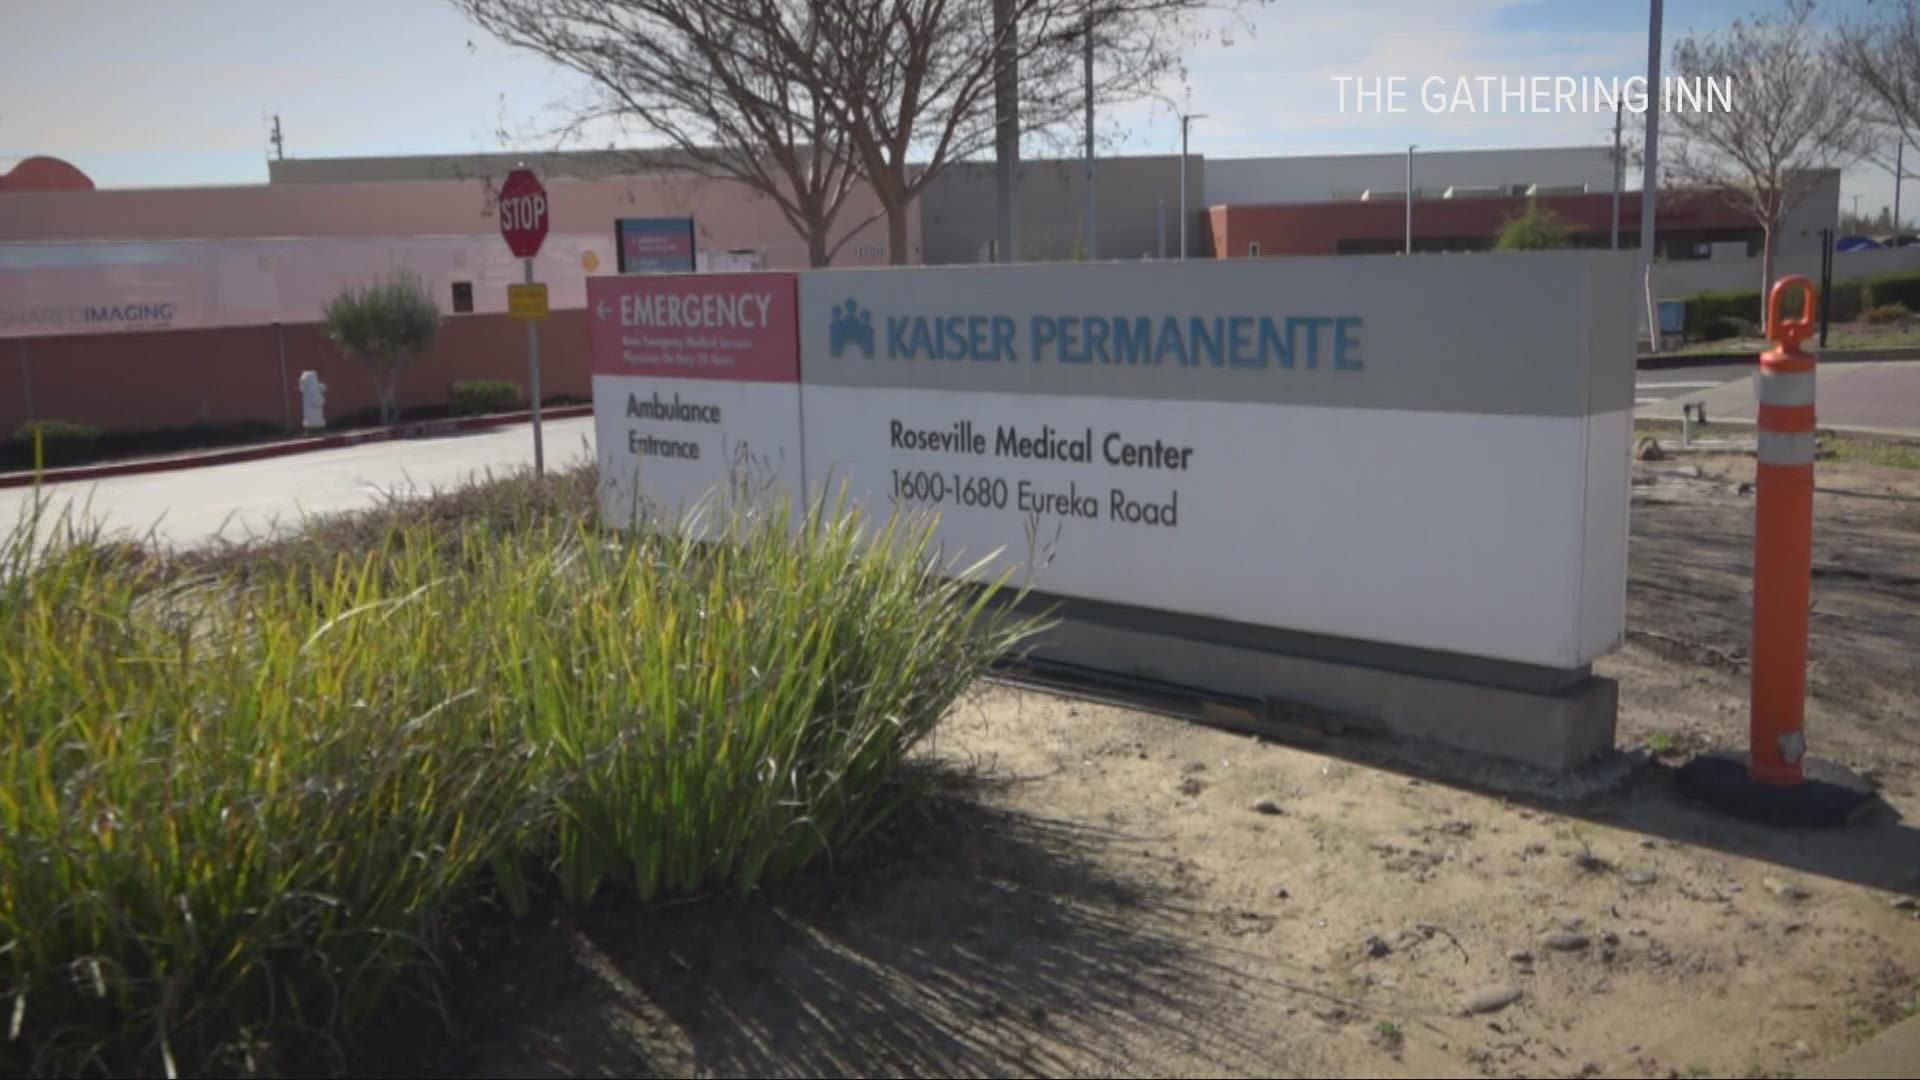 The Gathering Inn, based in Placer County, got nearly $100,000 from Kaiser Permanente for its medical respite program.